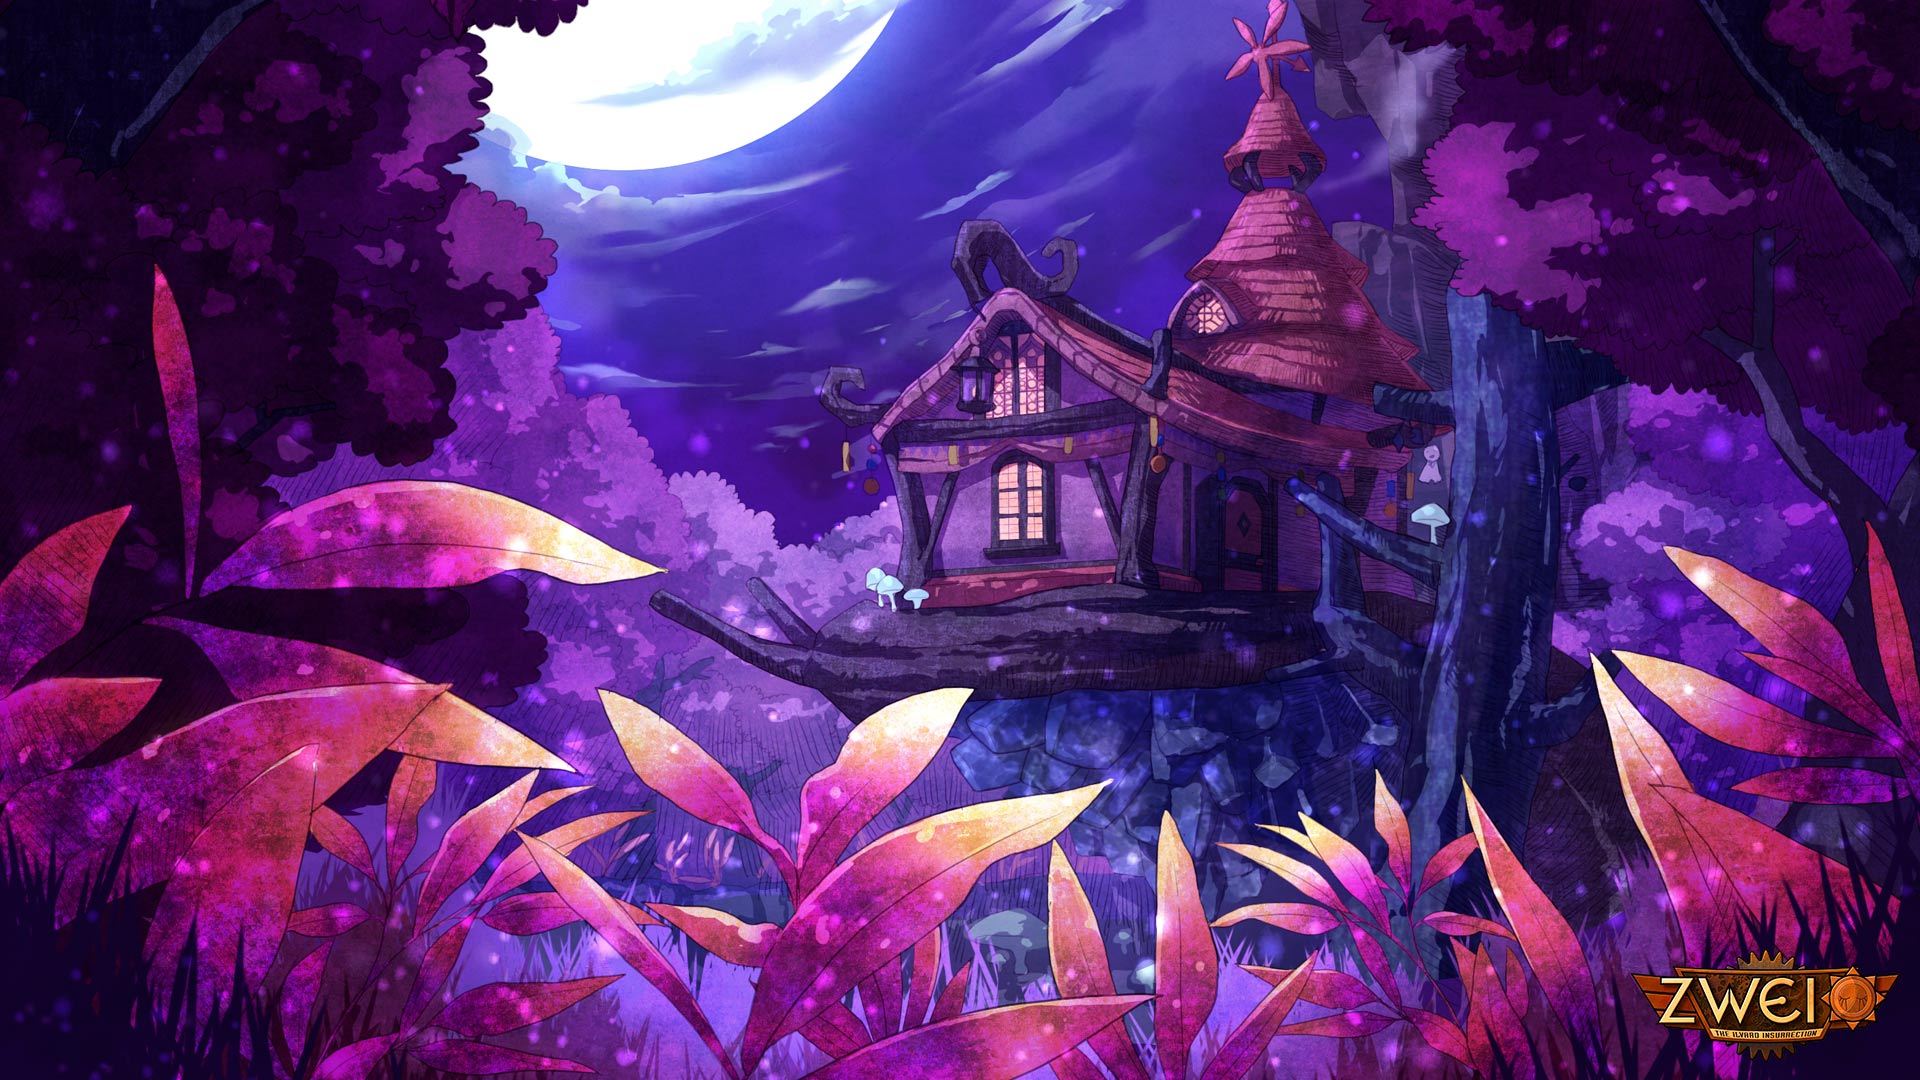 The Witch's Hut HD Wallpaper